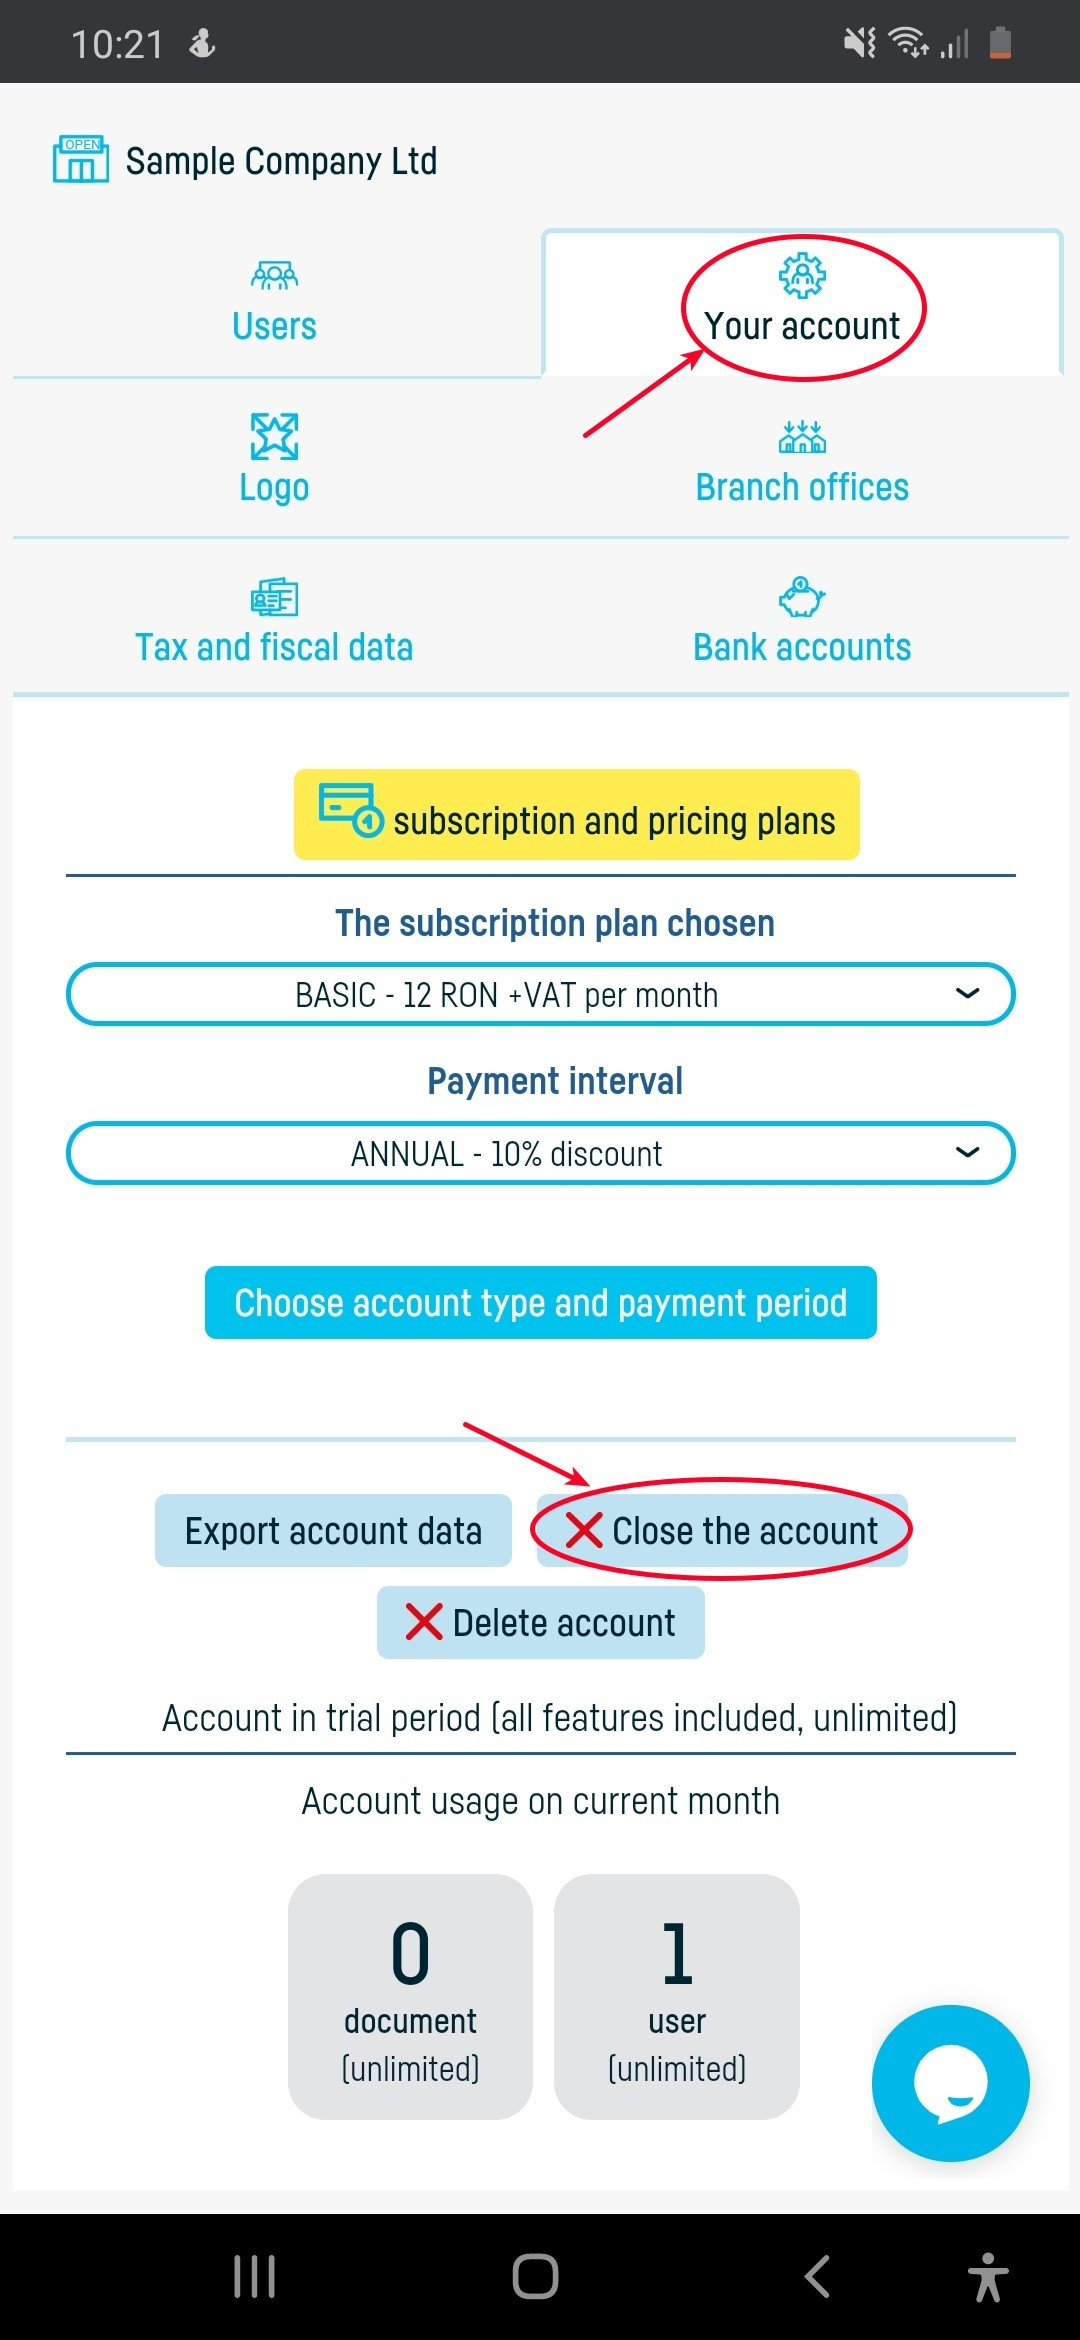 How do I close my account at online-billing-service? - step 2